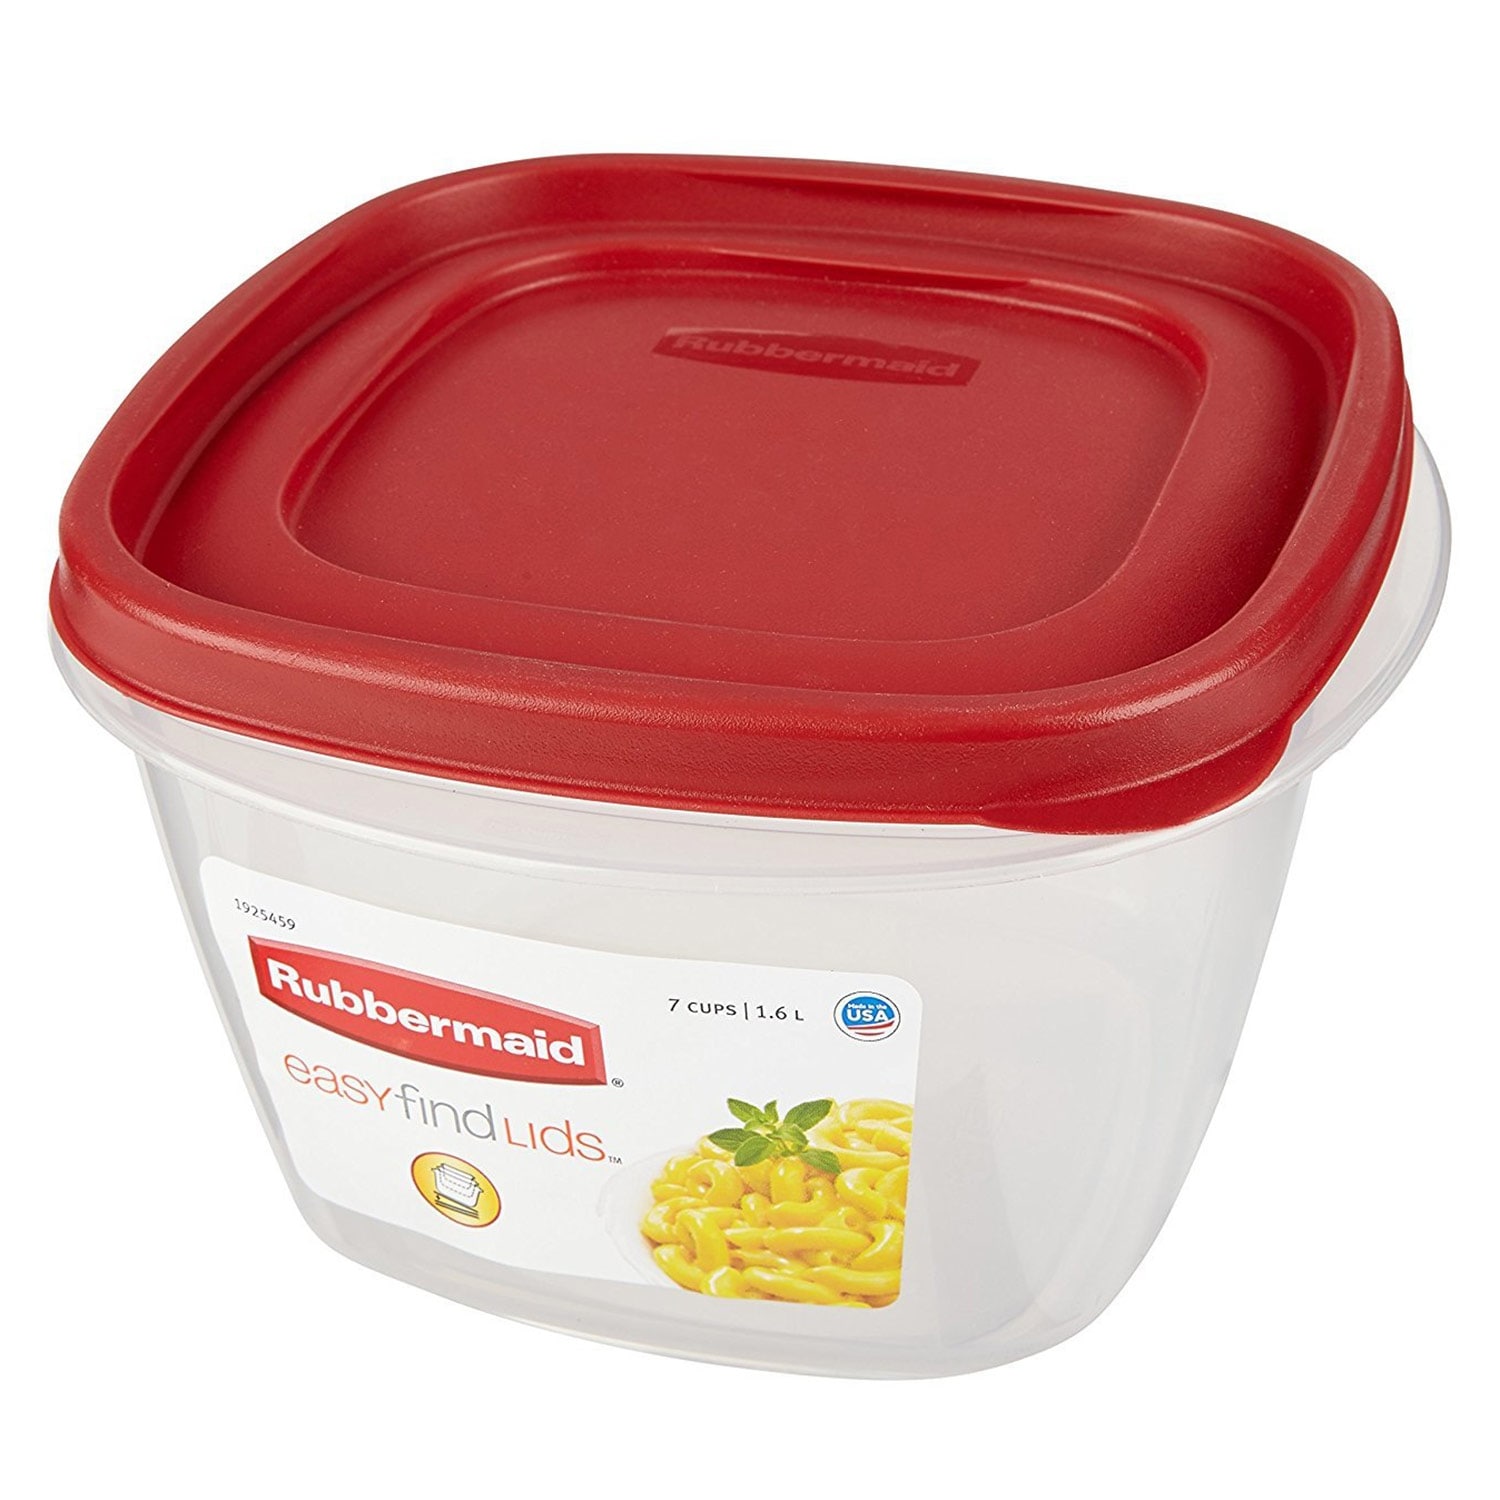 Rubbermaid 16-Piece Food Storage Containers with Lids and Steam Vents,  Microwave and Dishwasher Safe, Red & Easy Find Lids 7-Cup Food Storage and